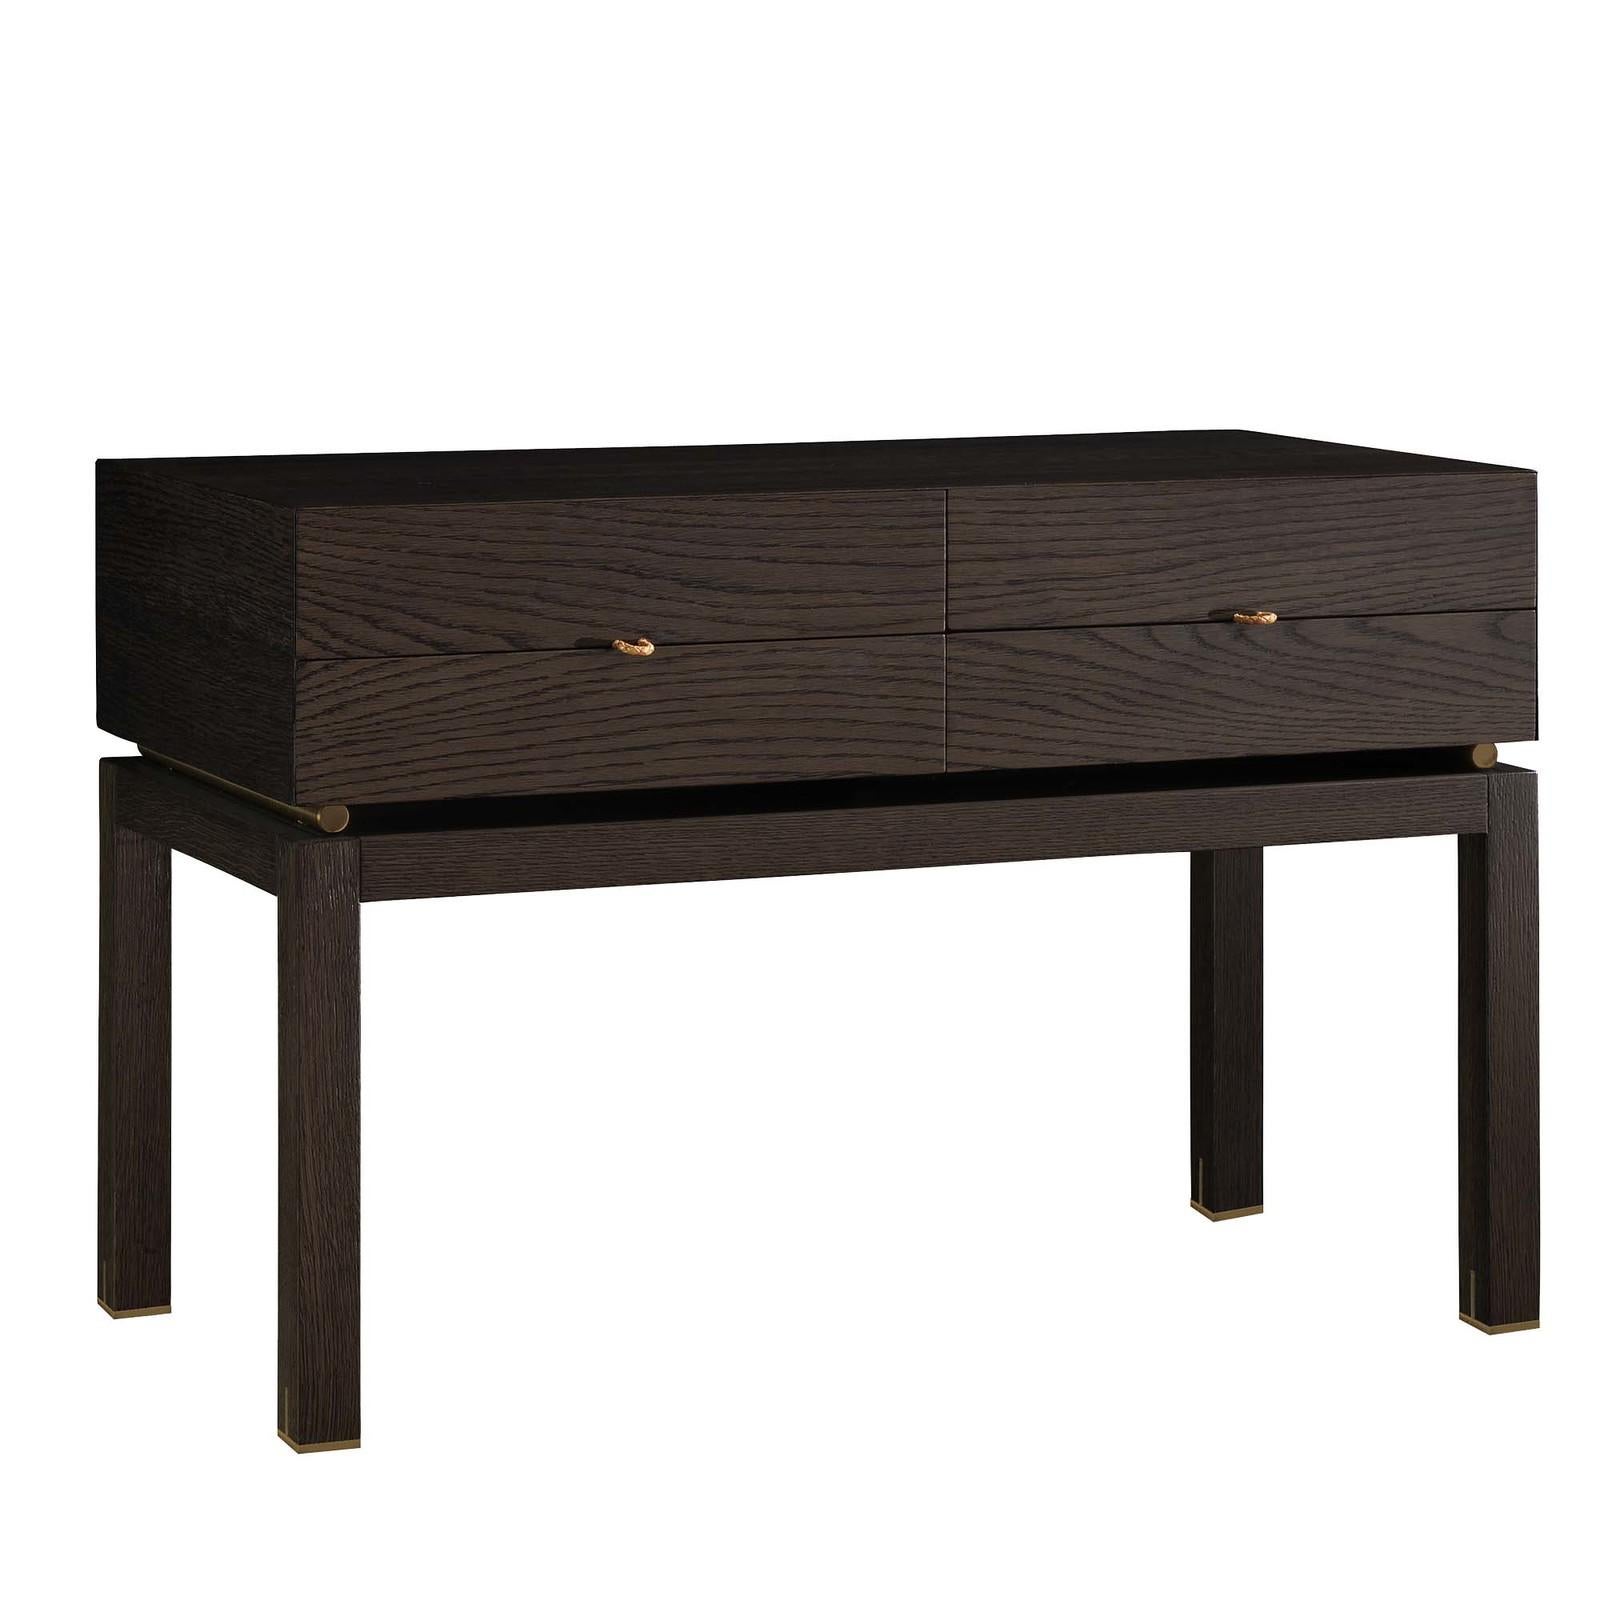 Crafted of stained oak in a rich dark brown hue, this side table strikes a clean-lined rectangular silhouette on four straight dowel legs. Set on two galvanized metal rods that raise the top adding lightness to the design, the four drawers with a